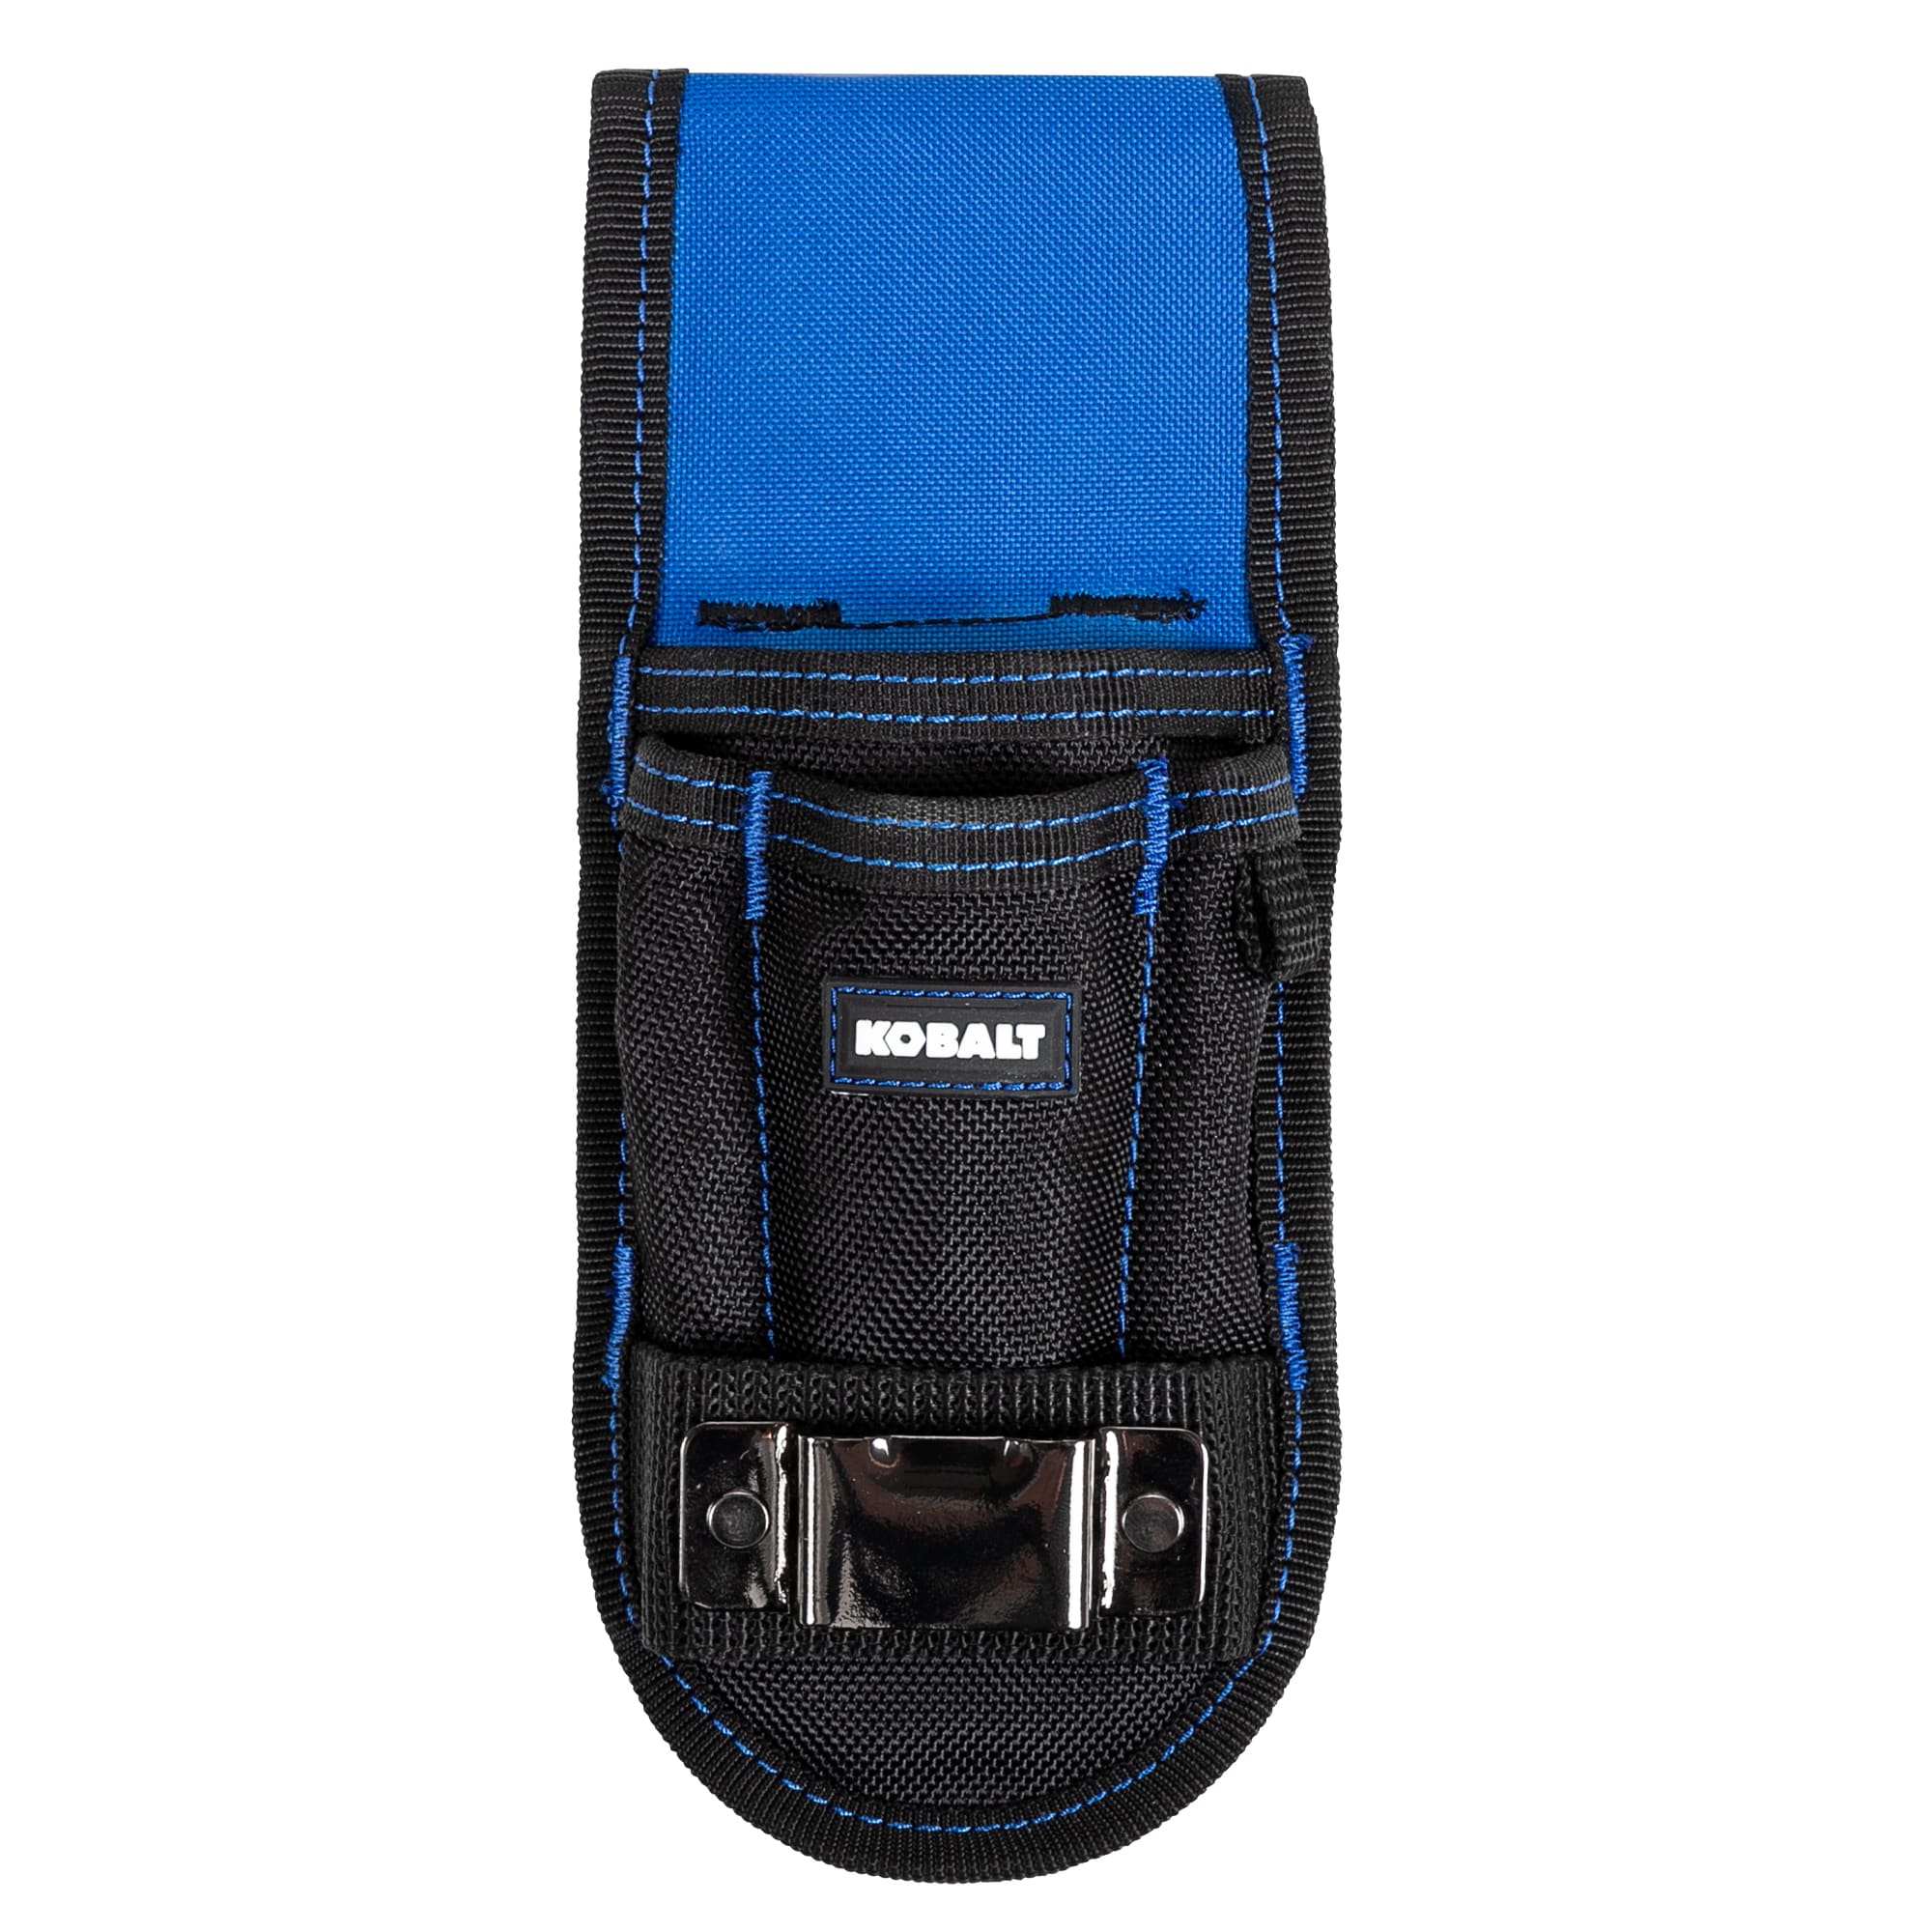 Dickies 57100 2-Compartment Large Phone and Tool Pouch